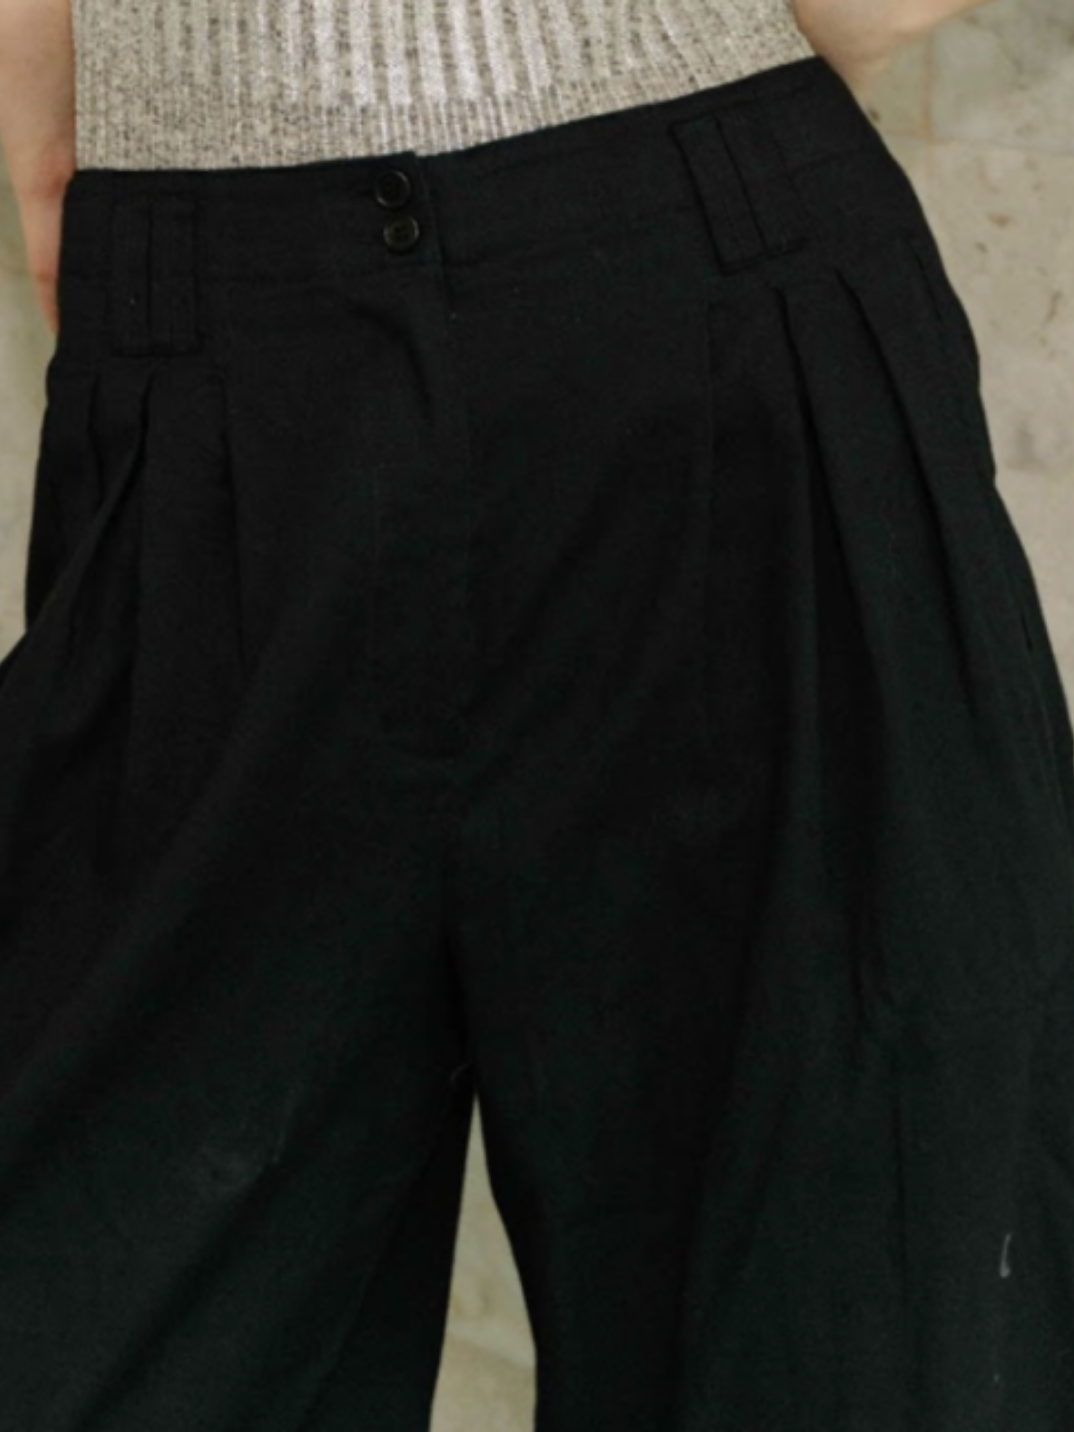 the perfect trouser pants super flattering on every body shape made from Tencel upcycled fabric ethically made in small batches sustainable fashion brand Hong Kong black pants